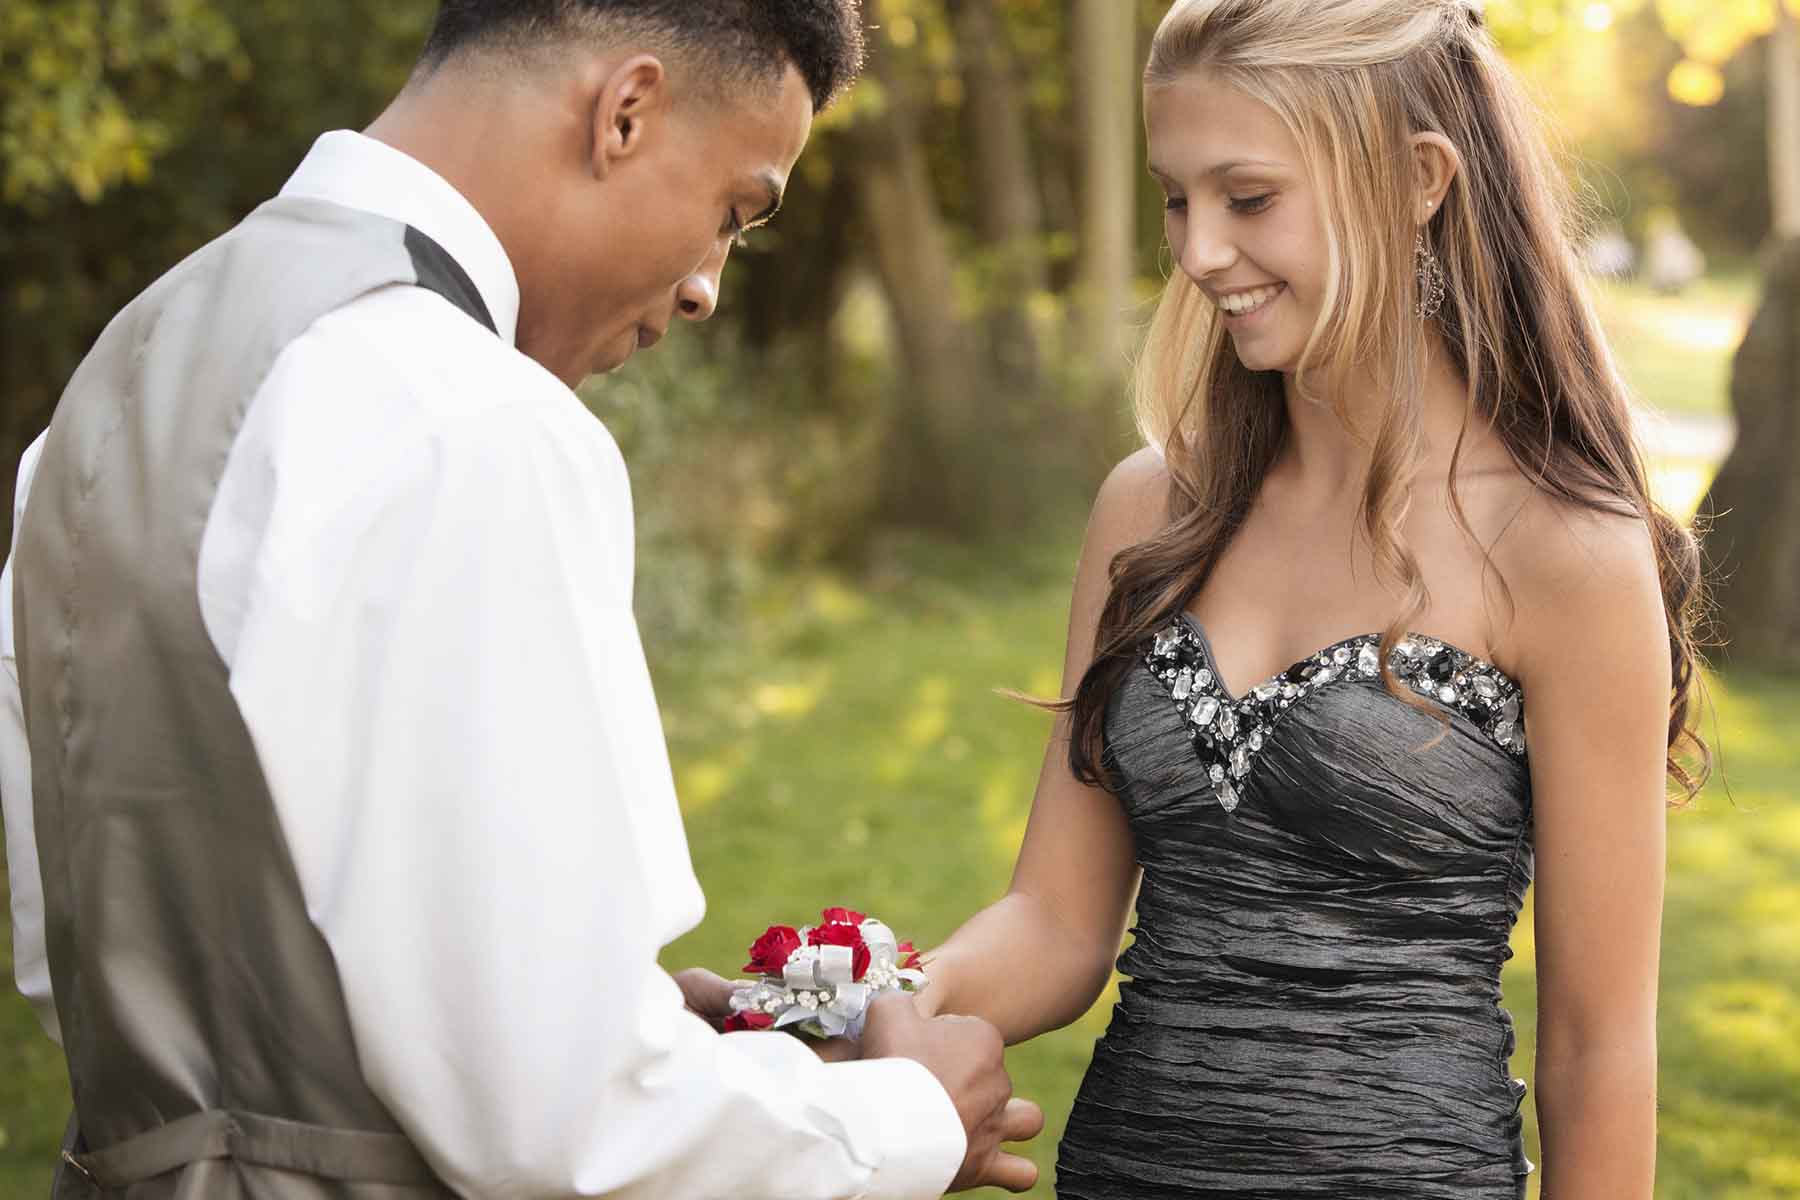 Teenage boy attaching a corsage to his prom date